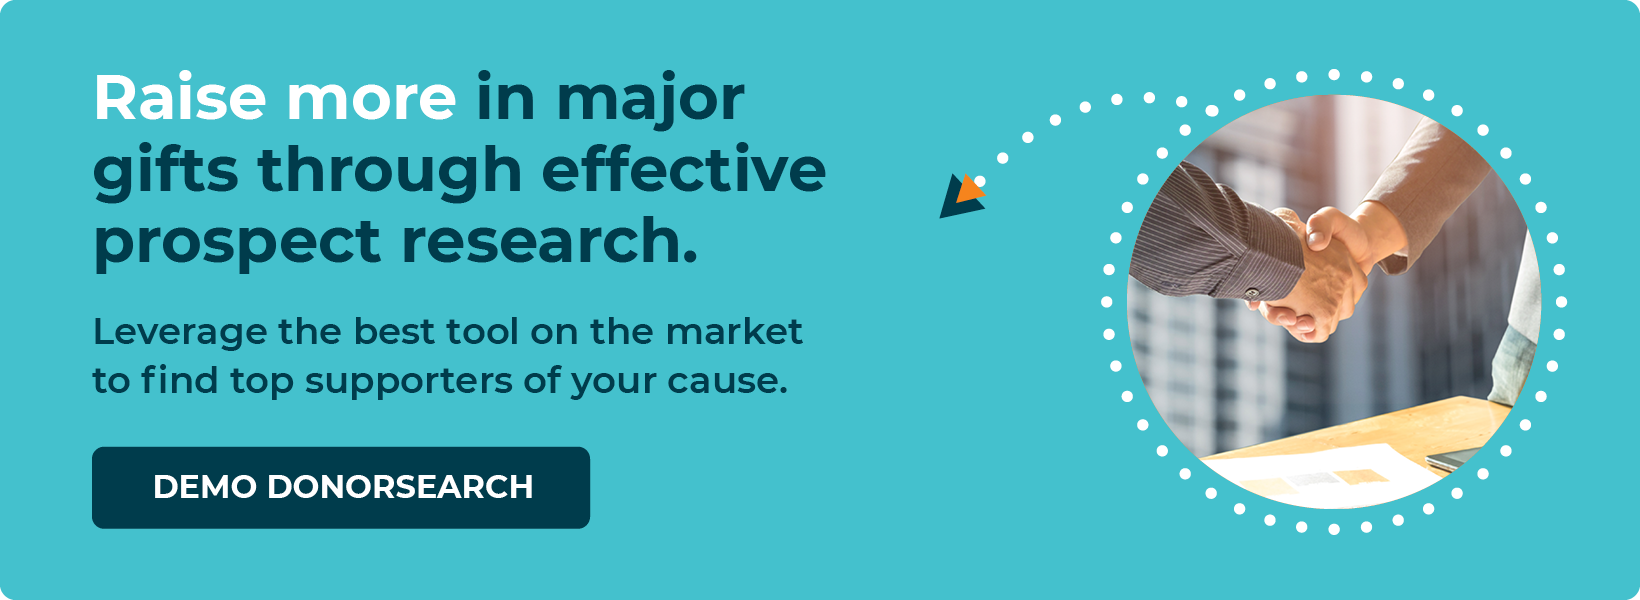 Get a demo of DonorSearch and learn how to use it for better prospect research! 